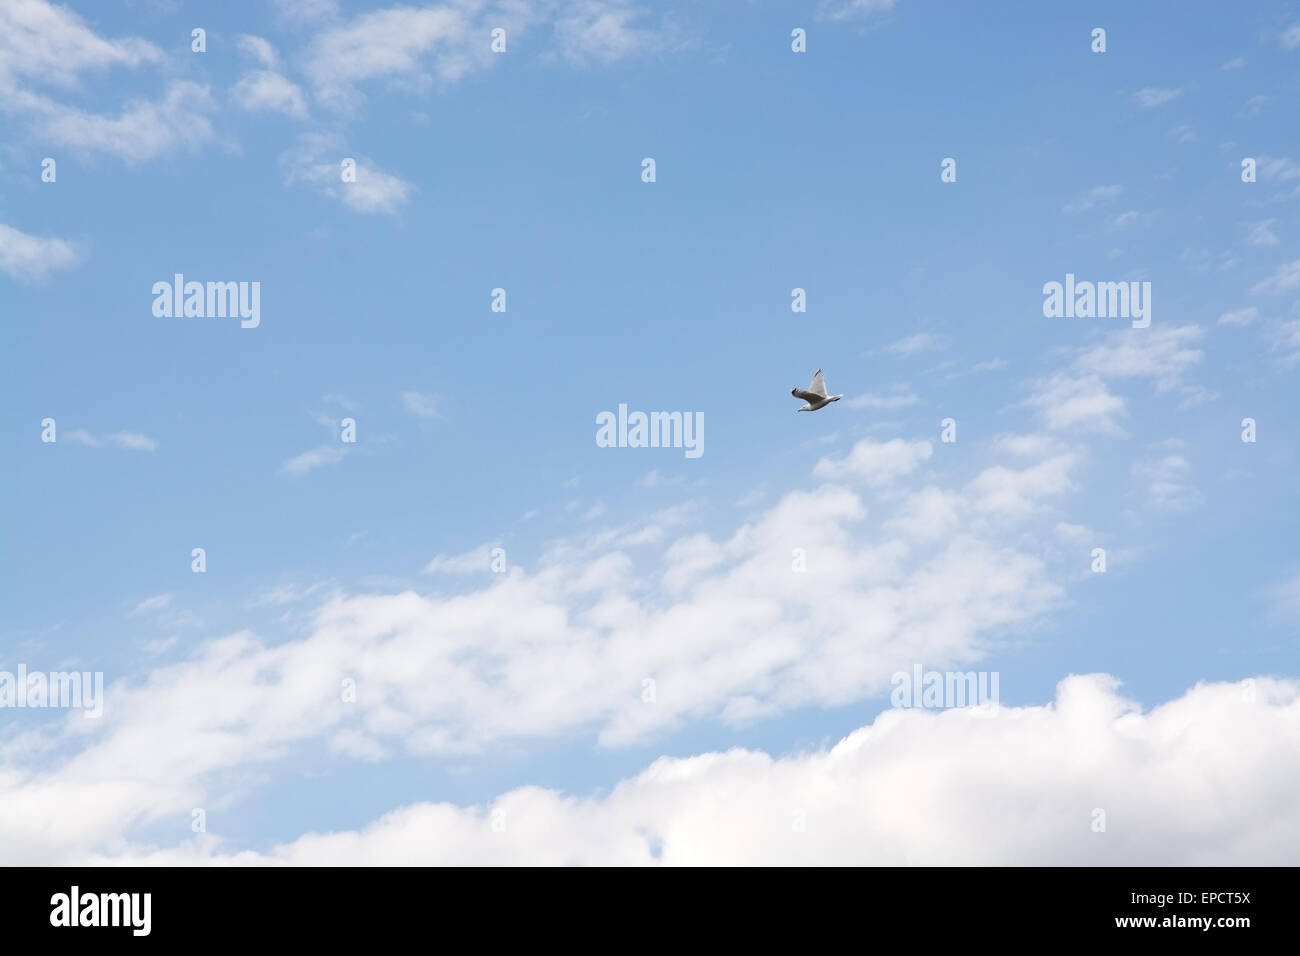 Cloudy sky with bird flying overhead in summer, Sweden. Stock Photo